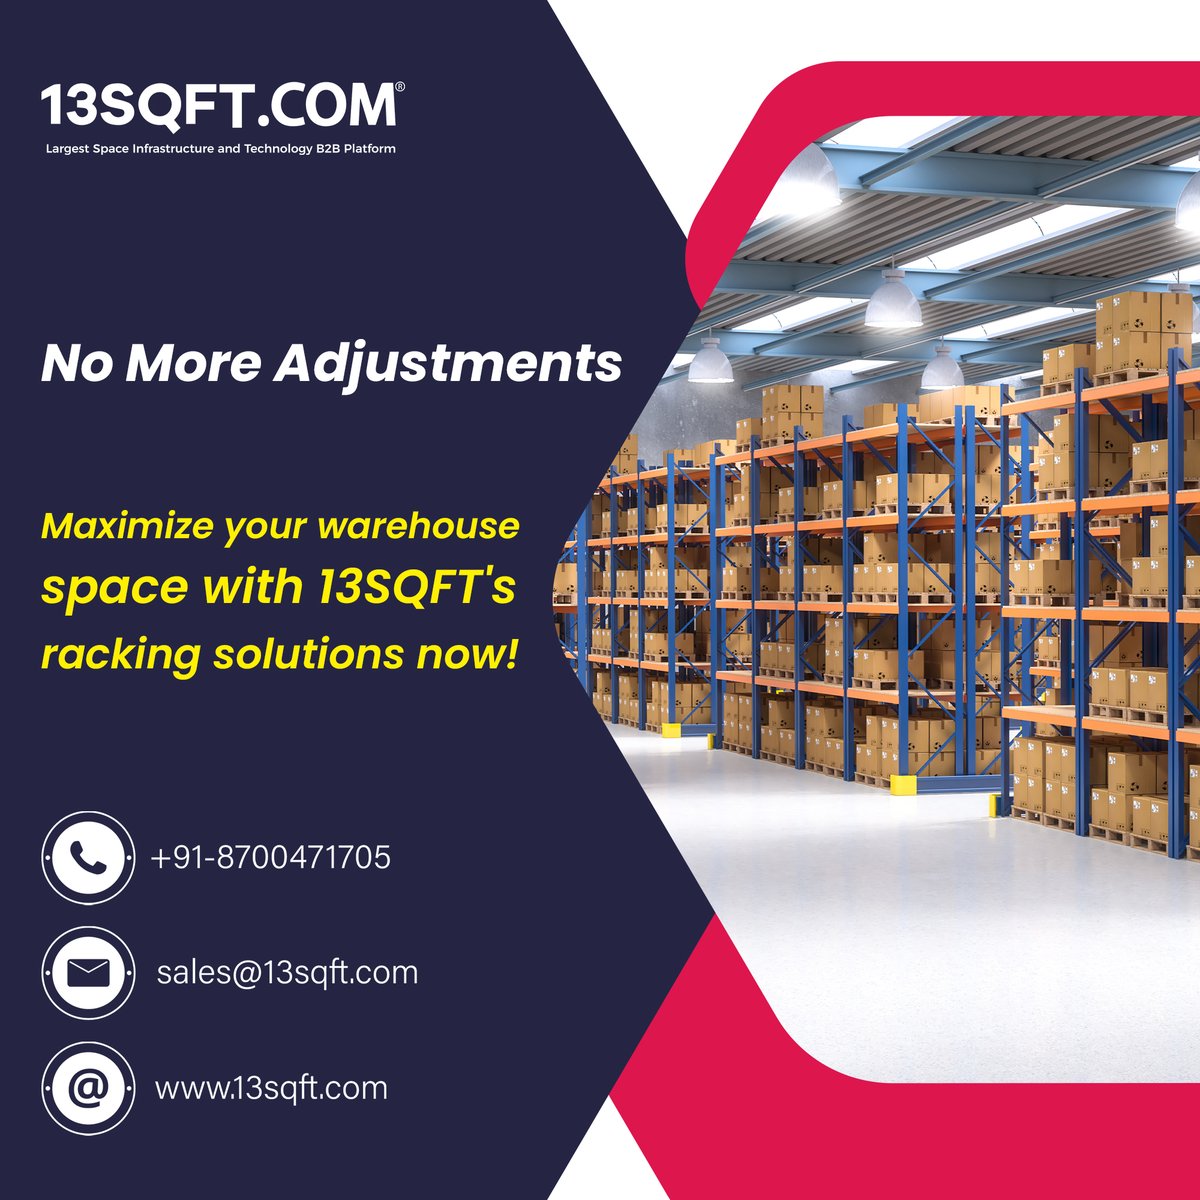 Unlock efficient space management with our cutting-edge racking storage solutions   Contact us: +918700471705 | sales@13sqft.com    

#StorageSolutions #WarehouseManagement #SpaceOptimization #Logistics #SupplyChain #Innovation #ProductivityBoost #SmartStorage #StorageRacks